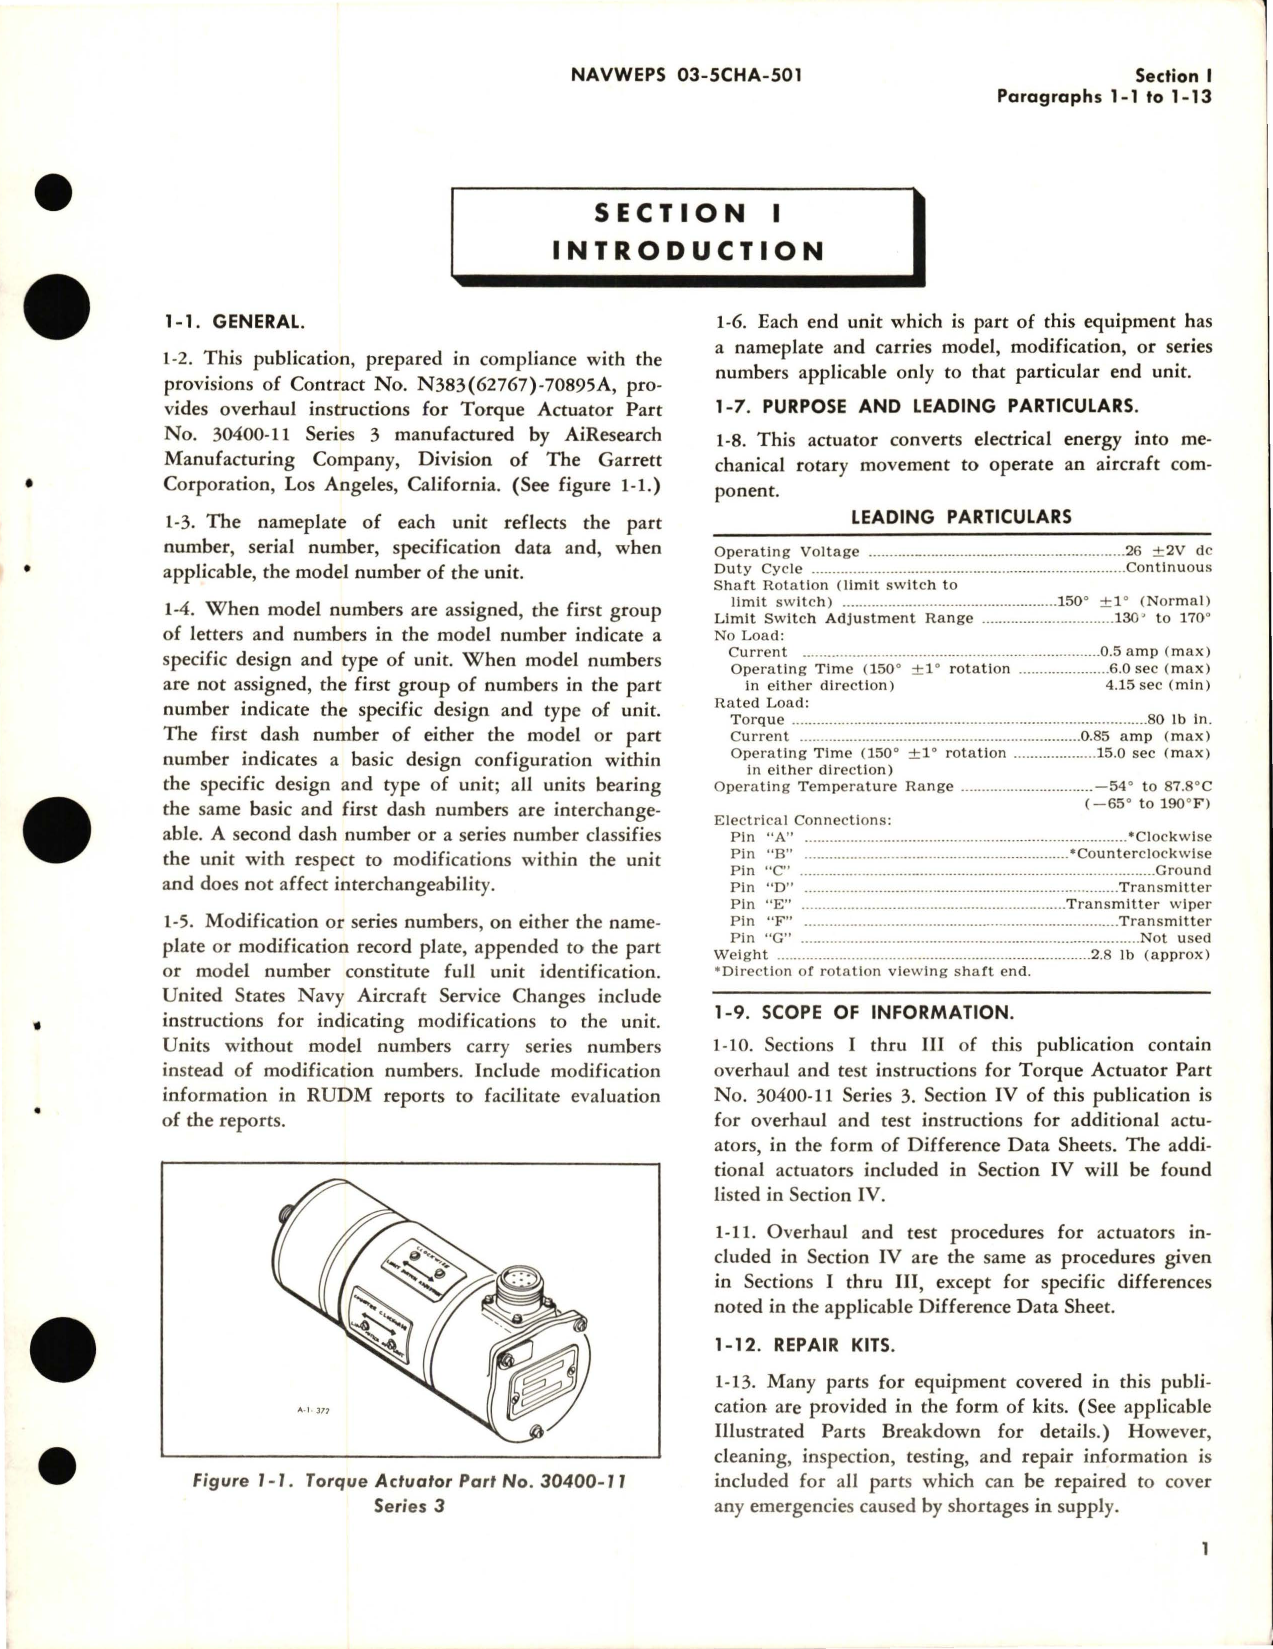 Sample page 5 from AirCorps Library document: Overhaul Instructions for Torque Actuators - Parts 30400-10, 30400-11 and 31698-1 